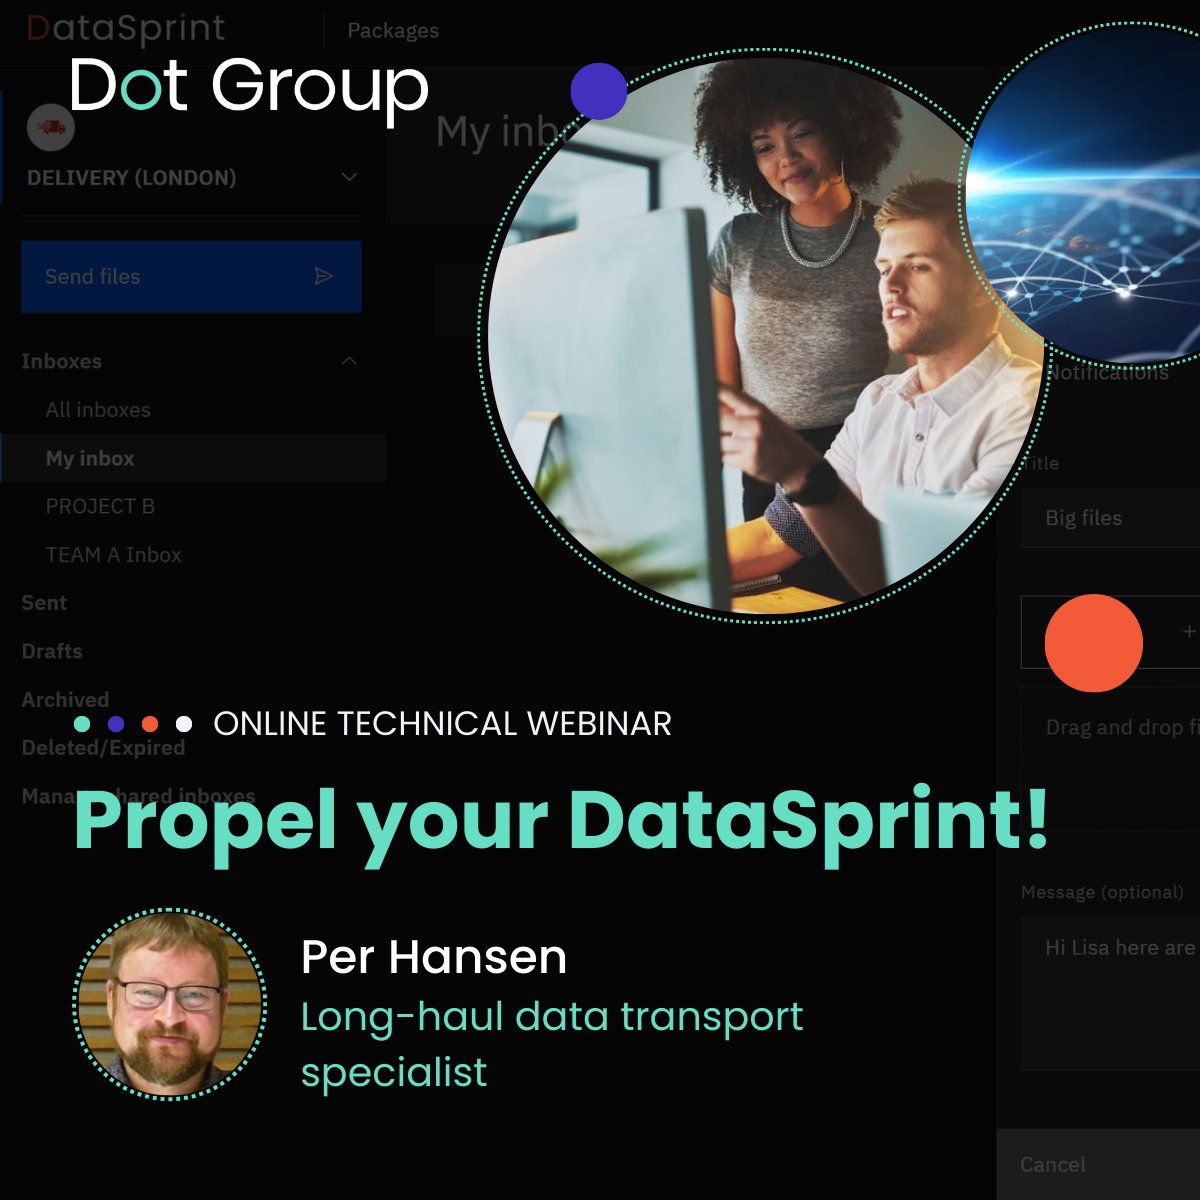 There’s still time to sign up for today’s online webinar! Secure your spot now to join Per Hansen at 11am CET/10am GMT or 4:30pm CET/3:30pm GMT to find out how to elevate your #DataSprint game: bit.ly/4c6MFiP #datatransfer #filetransfer #PoweredByIBM #TheDataExperts